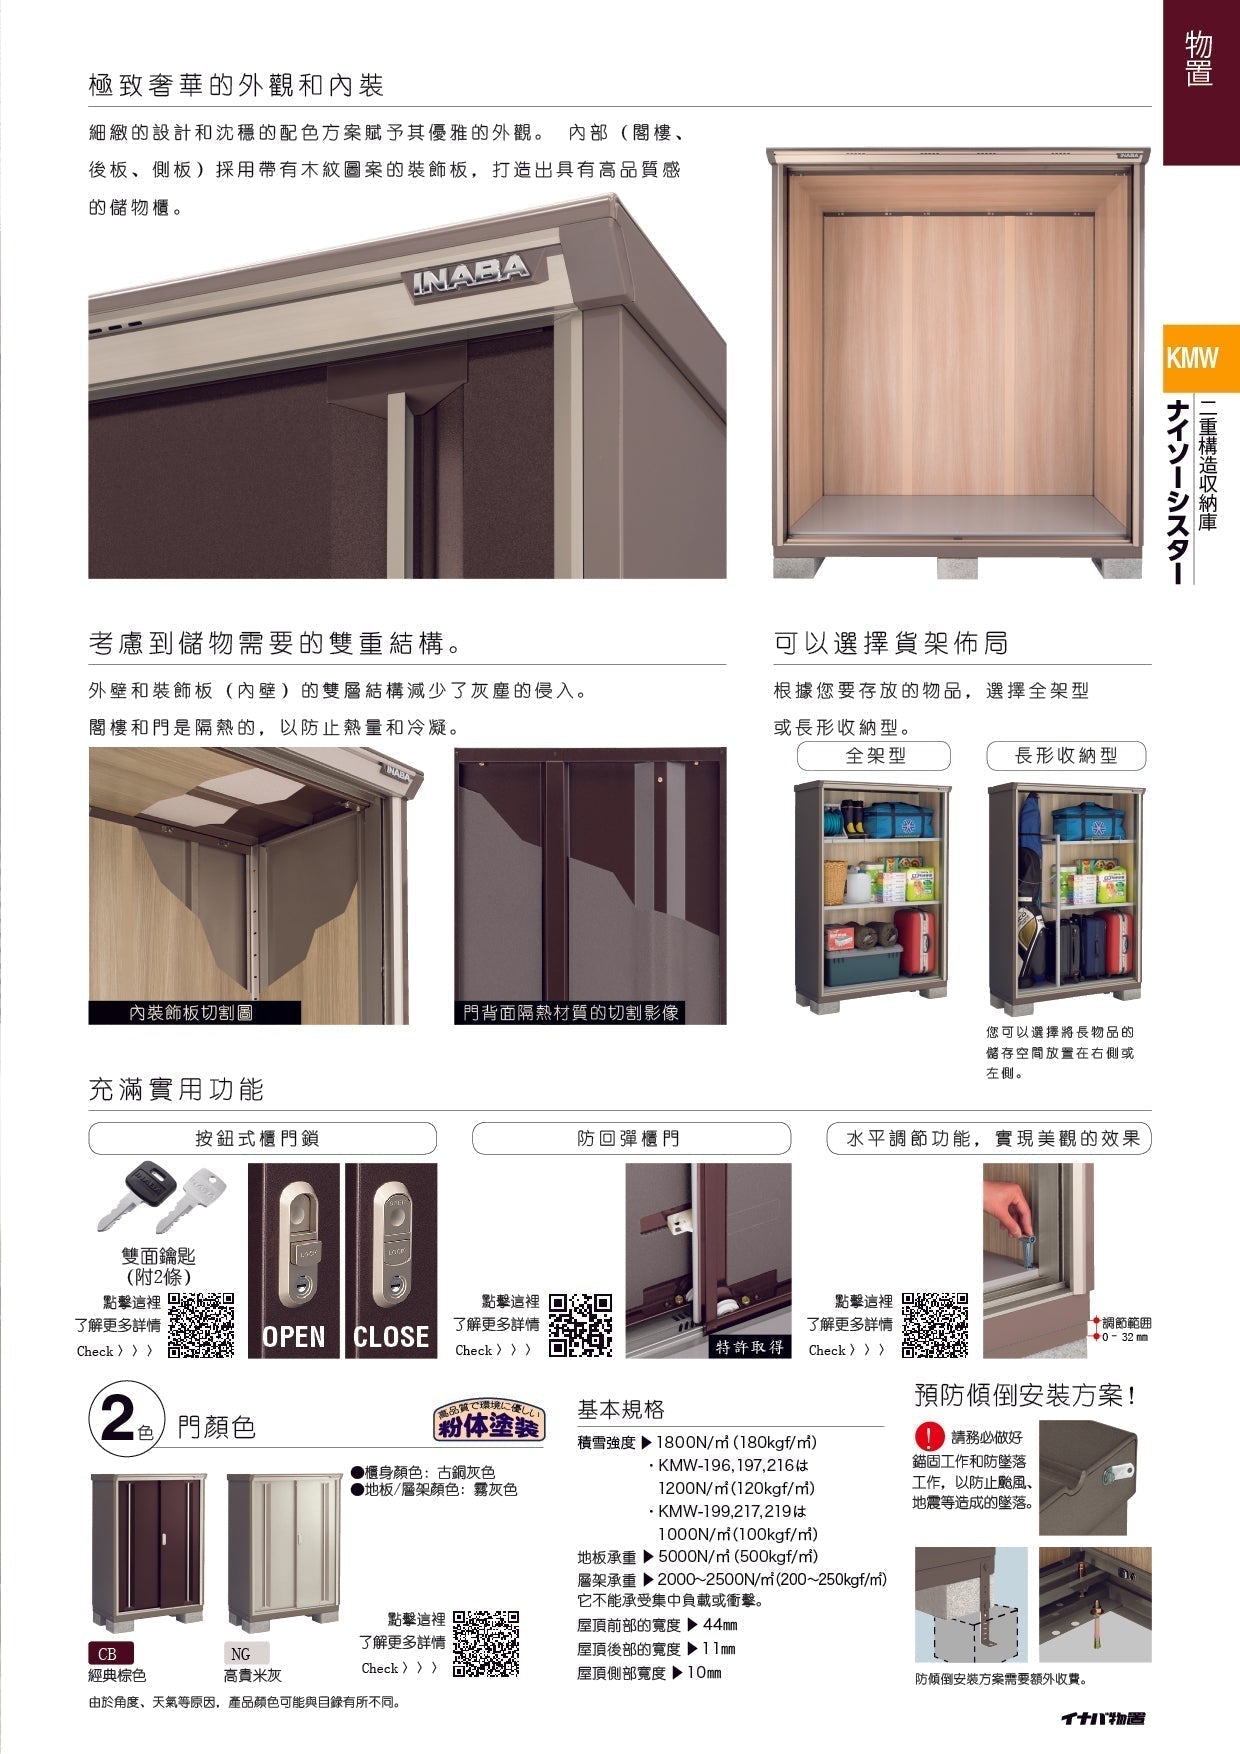 *Pre-order* Inaba Outdoor Storage Cabinets KMW-139E (W1340xD975xH1903mm) 2.486m3